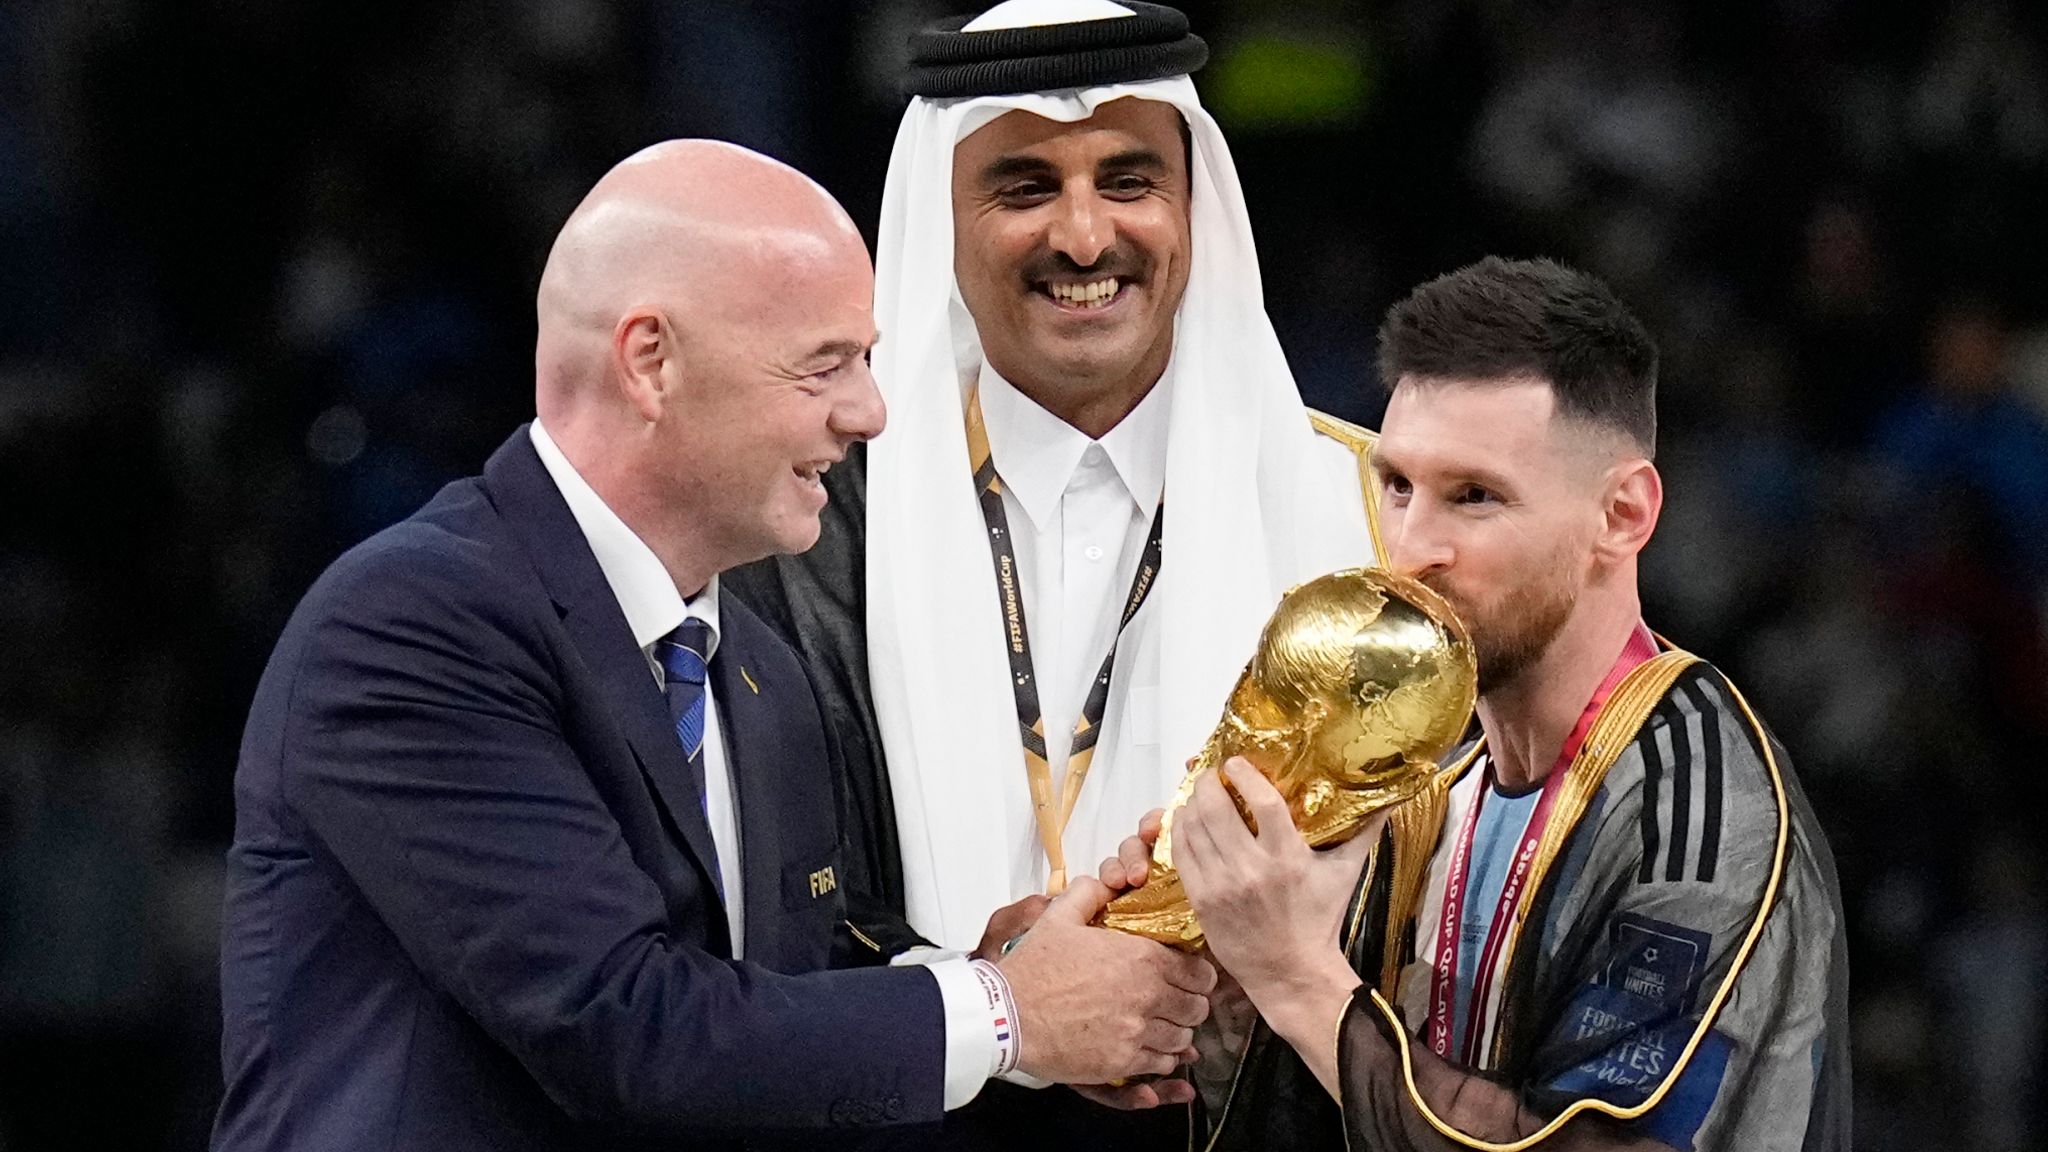 Need to know: the 2025 CWC & 2026 FIFA World Cup 